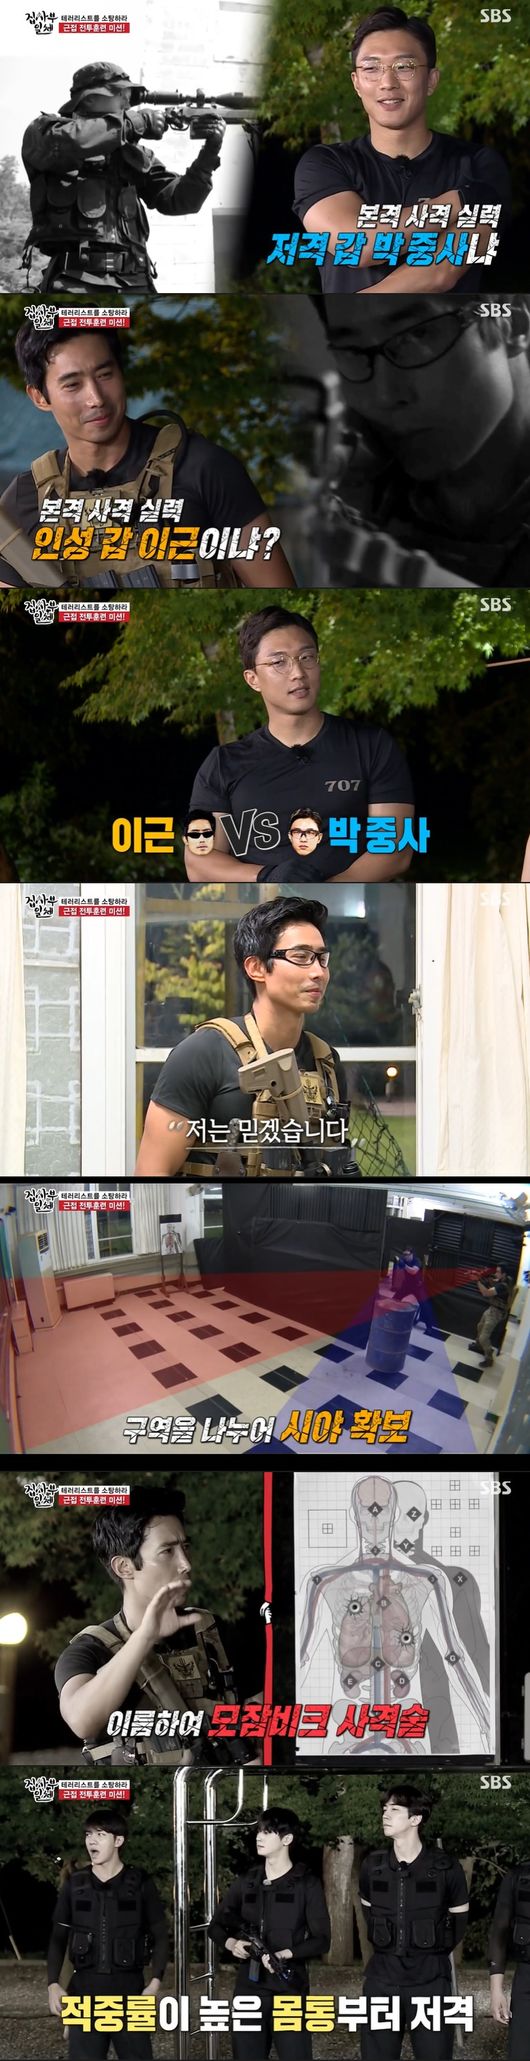 In All The Butlers, Lee Seung-gi played from Midam to Captain America: Civil War, sporting a special Warrior side.UDT Legend Captain America: Civil War Lee Geun Captain appeared as Master in the entertainment All The Butlers broadcast on the 20th.UDT Legend Captain America: Civil War Implant Captain has started training to become One Team.First, Lee Kahn Captain introduced the Bob Girl education method while preparing meals before training, and showed a crossFit demonstration called UDT tradition.I looked at Lee Geun Captain who showed CrossFit Jeongseok and admired it as Terminator.Following the charismatic Lee Geun Captain, the members also tried CrossFit.Shin Sung-rok, Top Model, perfect pose than thought, and Top Model smoothly, but failed with a total of six, and the iron rod meal was confirmed.Next was Lee Seung-gi, the Top Model.Lee Seung-gi, tense, said he was disappointed in the second inning, and soon made the 10th with Special Warriors pride.Lee Geun-Captain also praised it as good, action actor.The mood drove Yang Se-hyeong to the top model, making 10 lightly with a stable pose.After Kim Dong-Hyun, the last Cha Eun-woo also made the top model, lightly 10, with the perfect pose; after all, Shin Sung-rok won the iron rod hornbone.After the hard training, I shared my meal with a lunch box, and Shin Sung-rok, who ate alone at the bar, laughed, saying, I feel like boiling ramen on the top of the mountain.We started with UDT gun training in earnest. Lee Geun-Captain pulled out the training weapon and the members attention was focused.Lee said, If you get misplaced, you can die. He started a close combat training mission with a serious attitude from the shooting posture practice.Lee said, It is not a personal technique but a team tactic. He recalled the Army 707 Special Warrior, Park Sergeant first class, and said that he should shoot based on wind direction, wind speed, temperature and humidity.He also explained the target of the sniper and was surprised to hear the operation of One Shot One Kill.Lee and his first class continued to train with UDT and 707 joint training, and he told them about the close combat training.He told the mission to carry out a terrorist suppression mission, and when the team work is out of order, both the operation and life are dangerous, and informed him of training to strengthen faith and breathing among team members.First, Lee and Park first class hit the enemy with the top model, perfect sum without having to guess in advance.The two men said, As a result of the training of the repetition, it is ripe for the body.Next, Kim Dong-Hyun was the top model on the close combat training mission, but he was laughing in a mistake-filled position.After the training, Lee said, I was nervous because the gun was coming and going, he laughed at Kim Dong-Hyuns training.Lee Geun-Captain suddenly raided the members rooms at dawn, and Kim Dong-Hyun, Yang Se-hyeong and Shin Sung-rok, who could not memorize their codes, were summoned to the lineup.I am training at UDT every day, and I am ready for this failure, said Captain.Above all, Park Sergeant first class said, Lee Seung-gis army acquaintance is under me. I actually heard that I worked really hard in the military, I did not have to go to Chen Li march. Yang Se-hyeong told the i, Please boldly edit this part, and laughed.All The Butlers broadcast screen capture